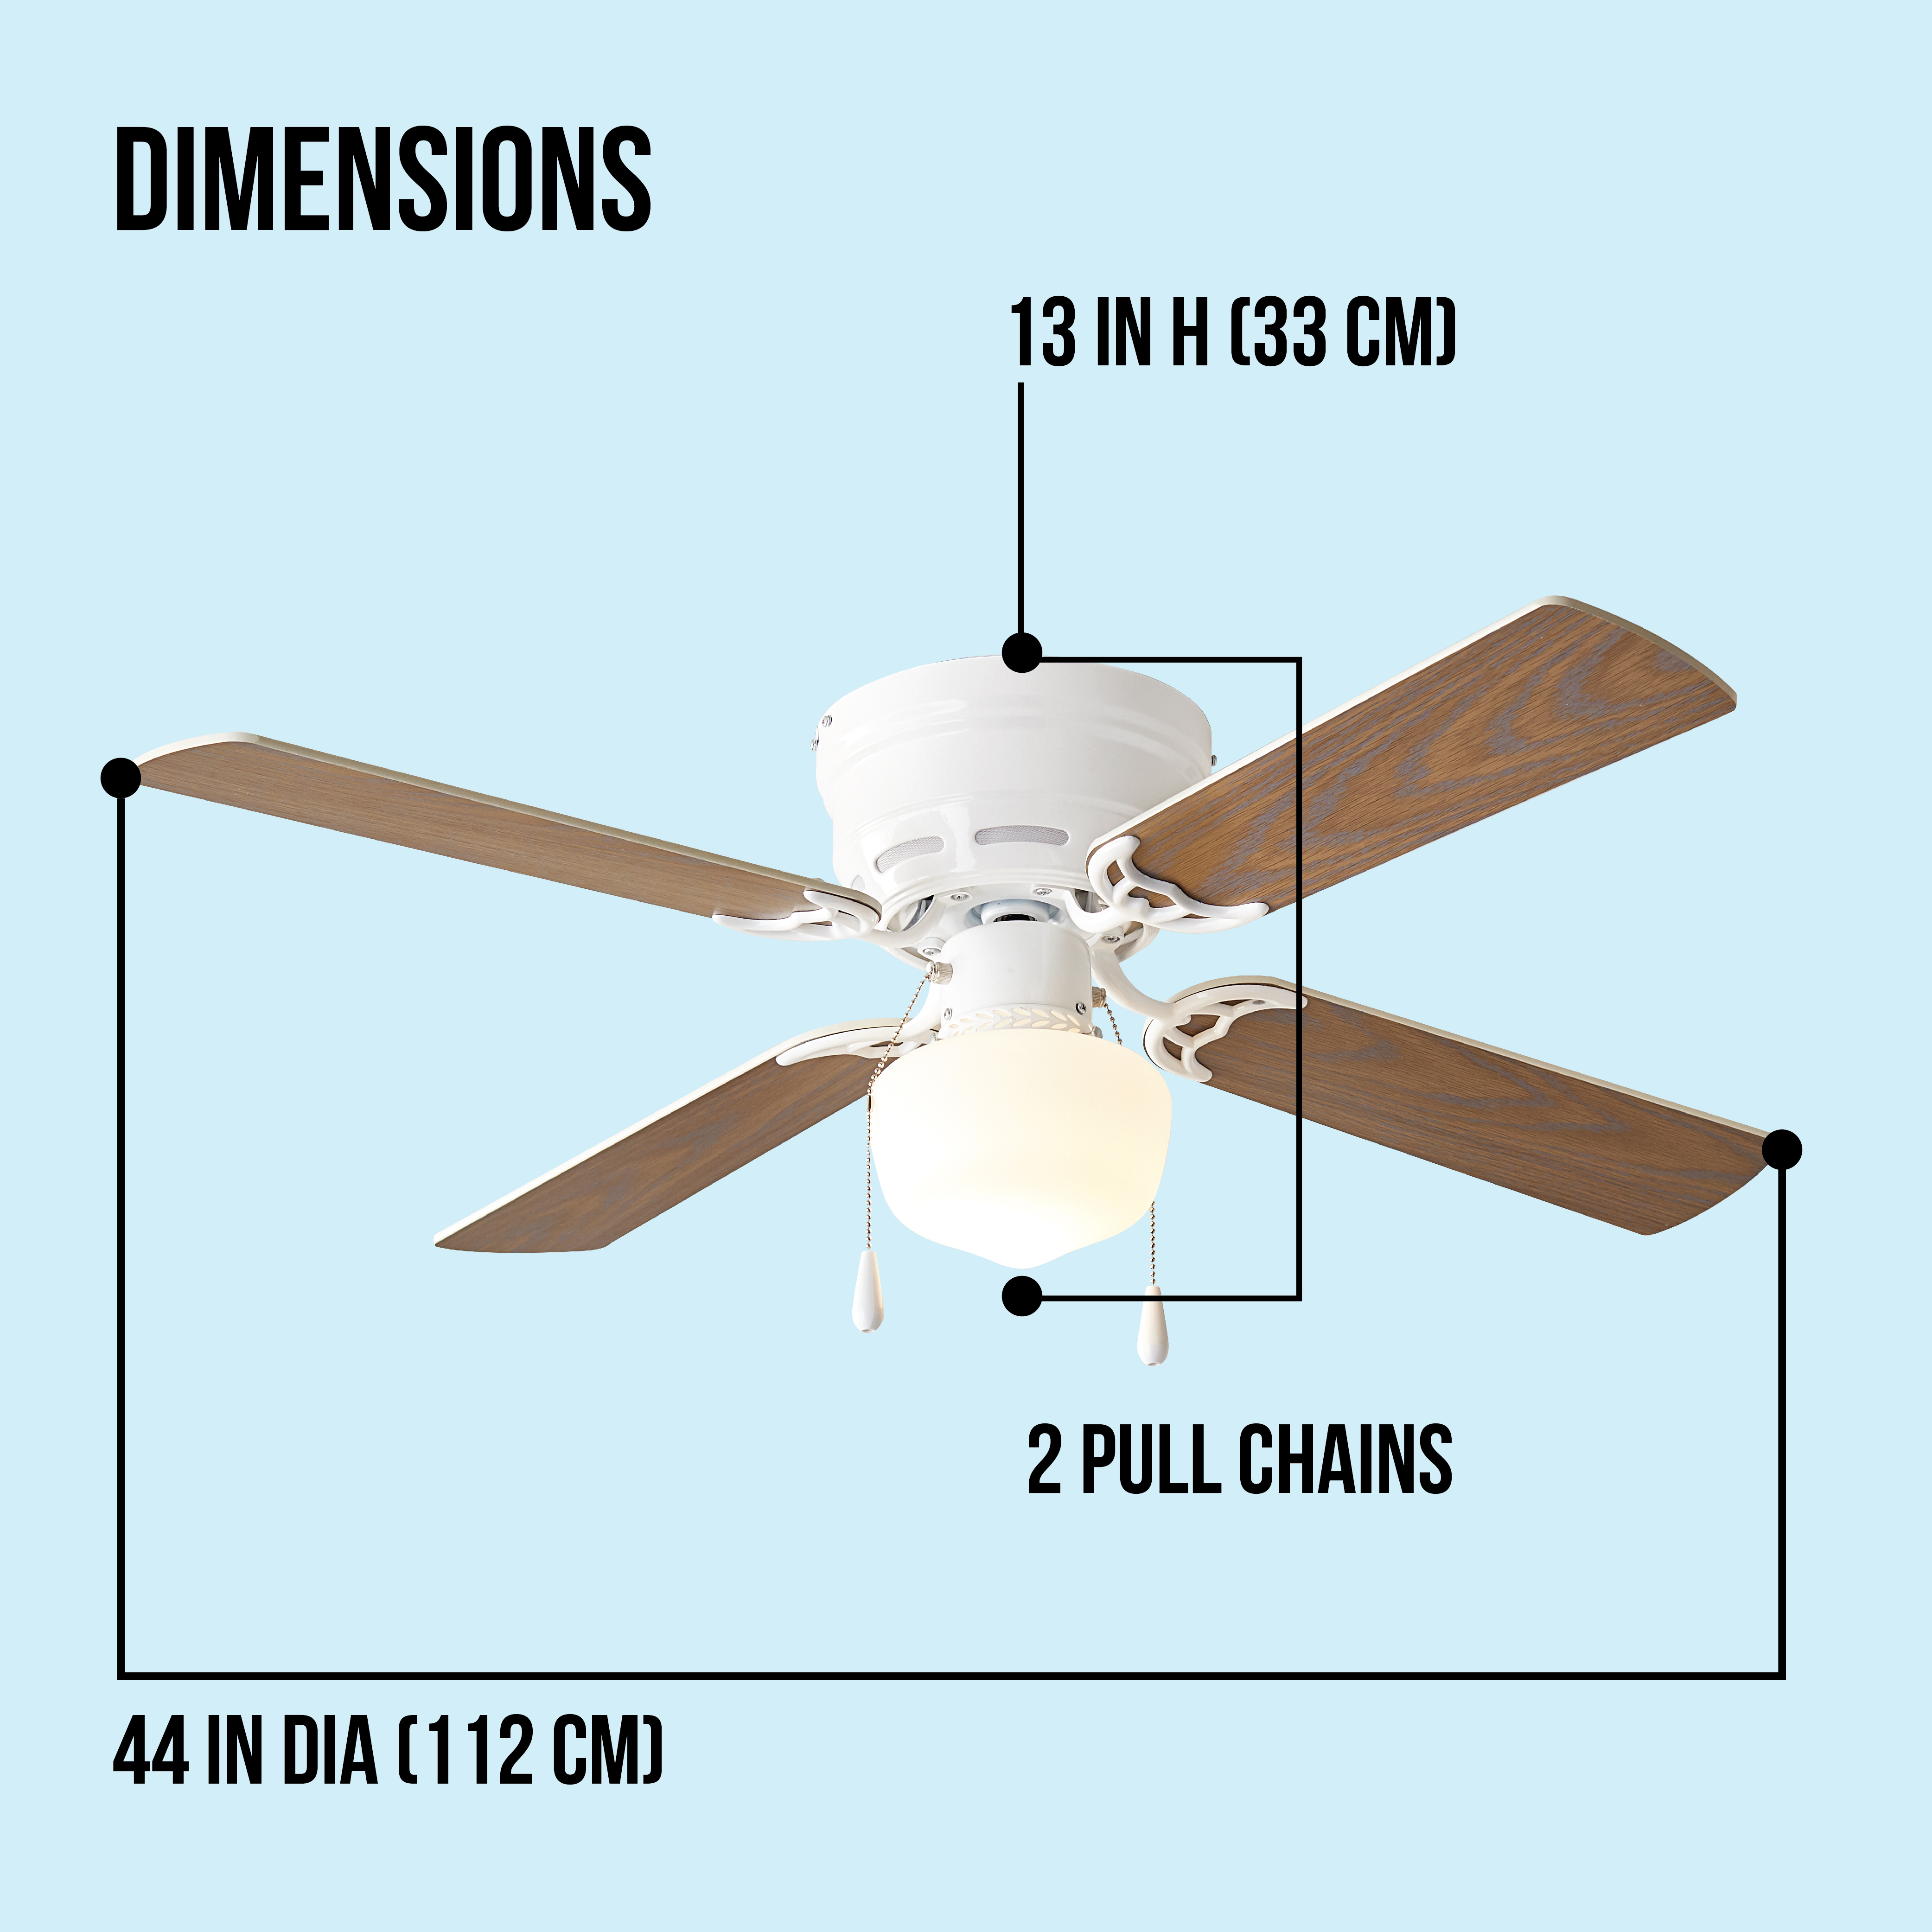 Mainstays 42 Inch Hugger Metal Indoor Ceiling Fan with Light, White, 4 Blades, LED Bulb, Reverse Airflow - image 4 of 17